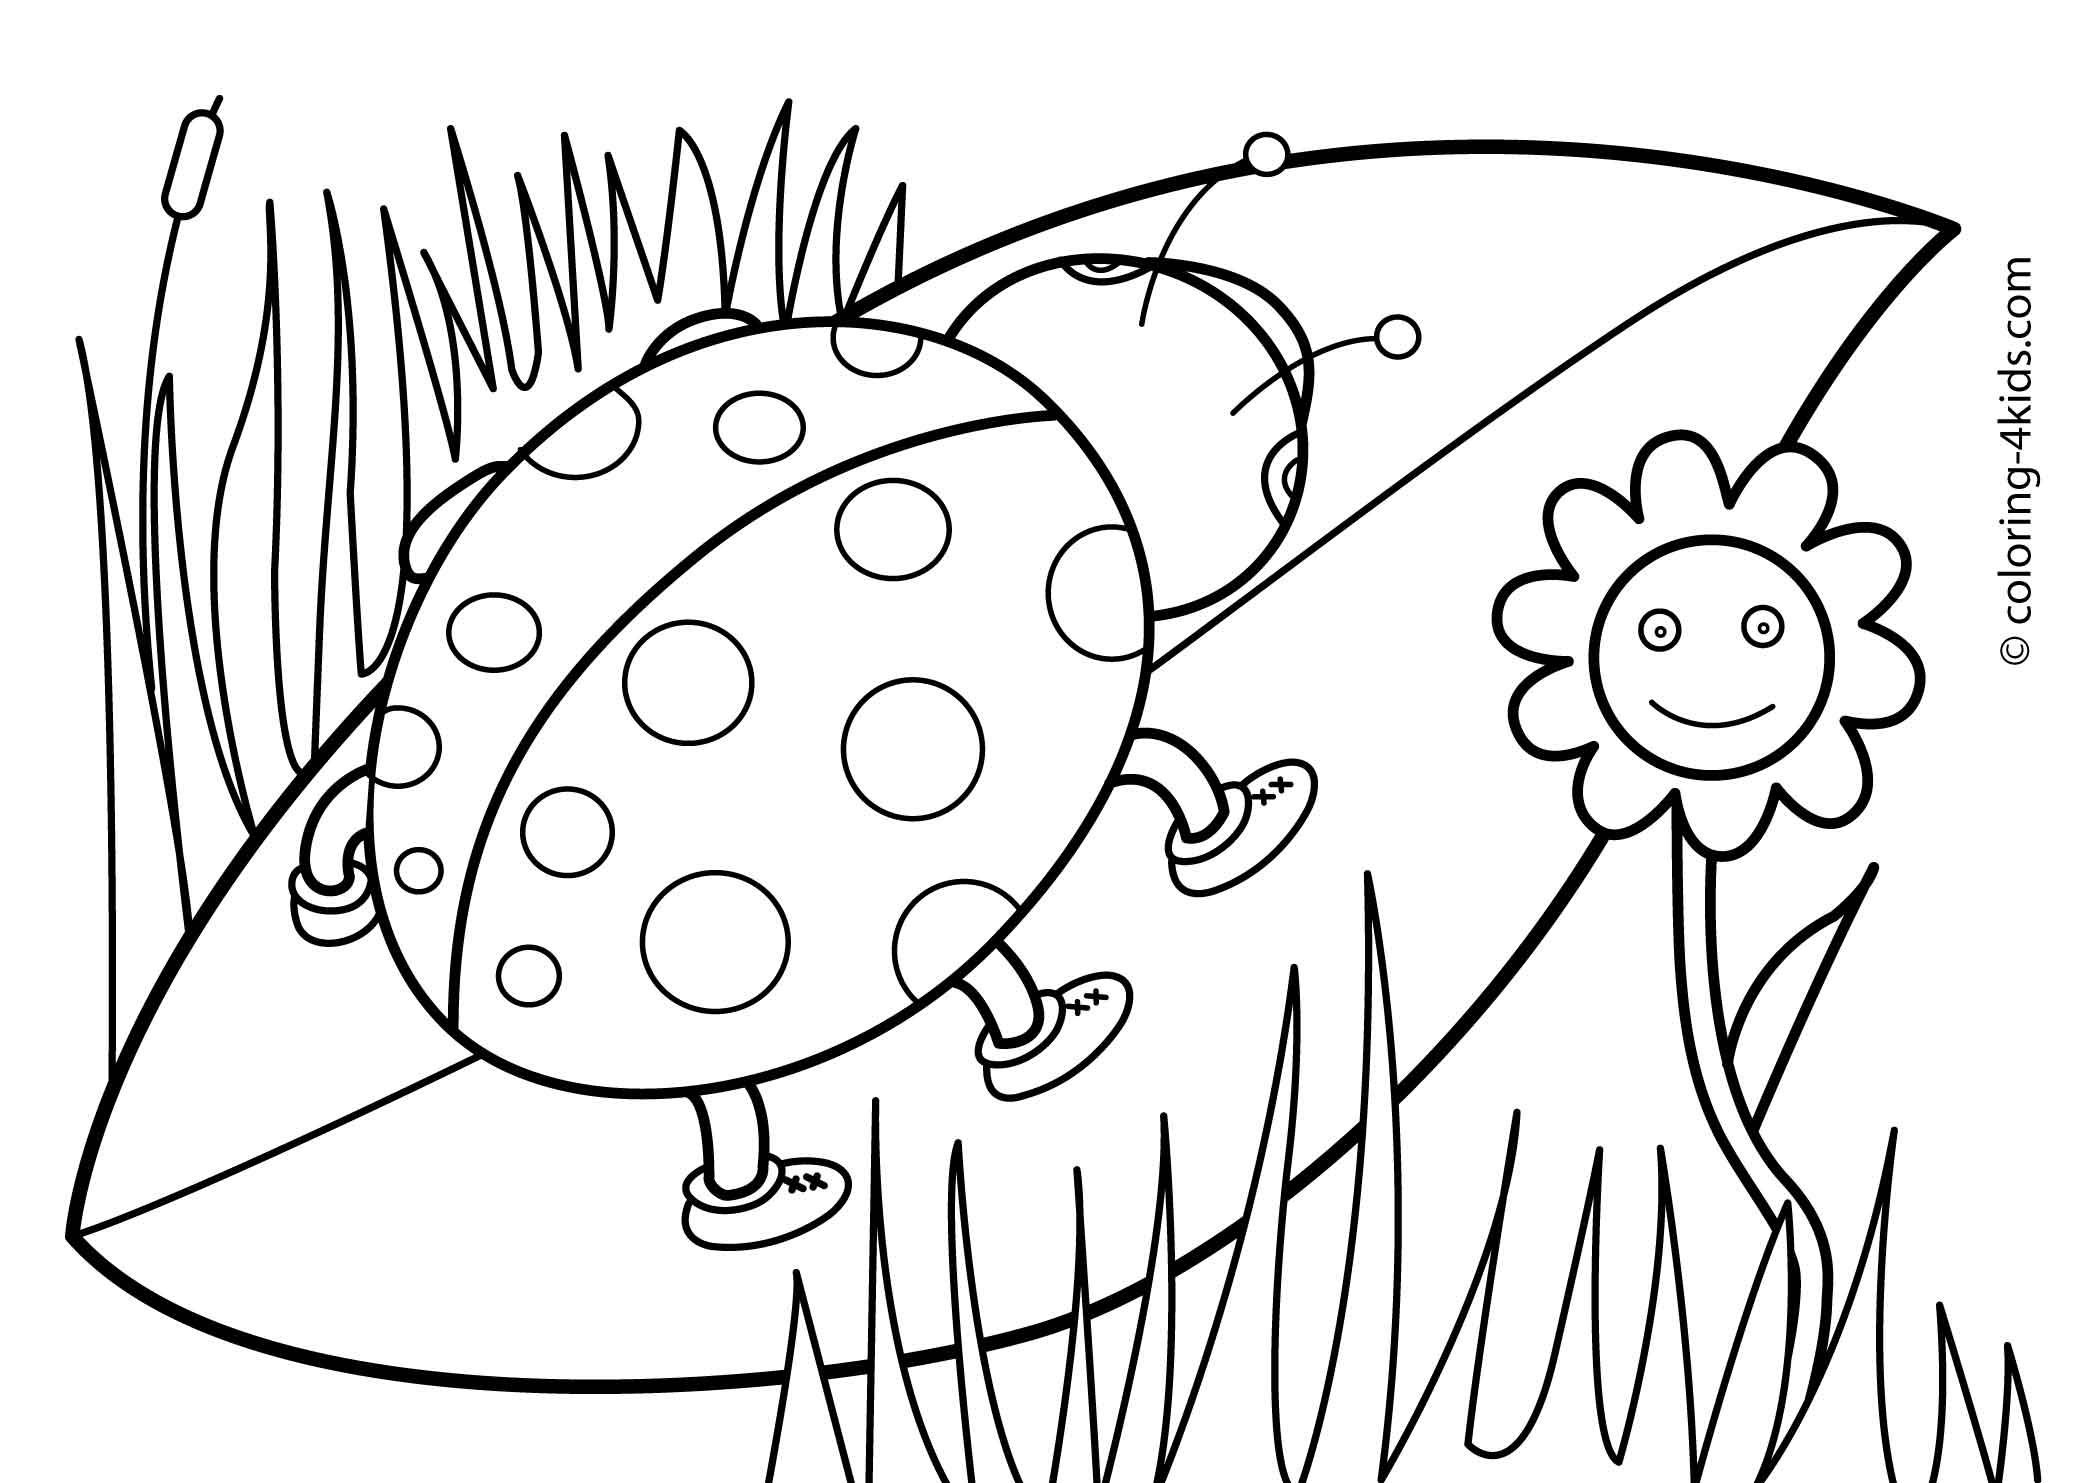 Free Spring Coloring Pages, Download Free Clip Art, Free Clip Art On - Free Printable Spring Pictures To Color